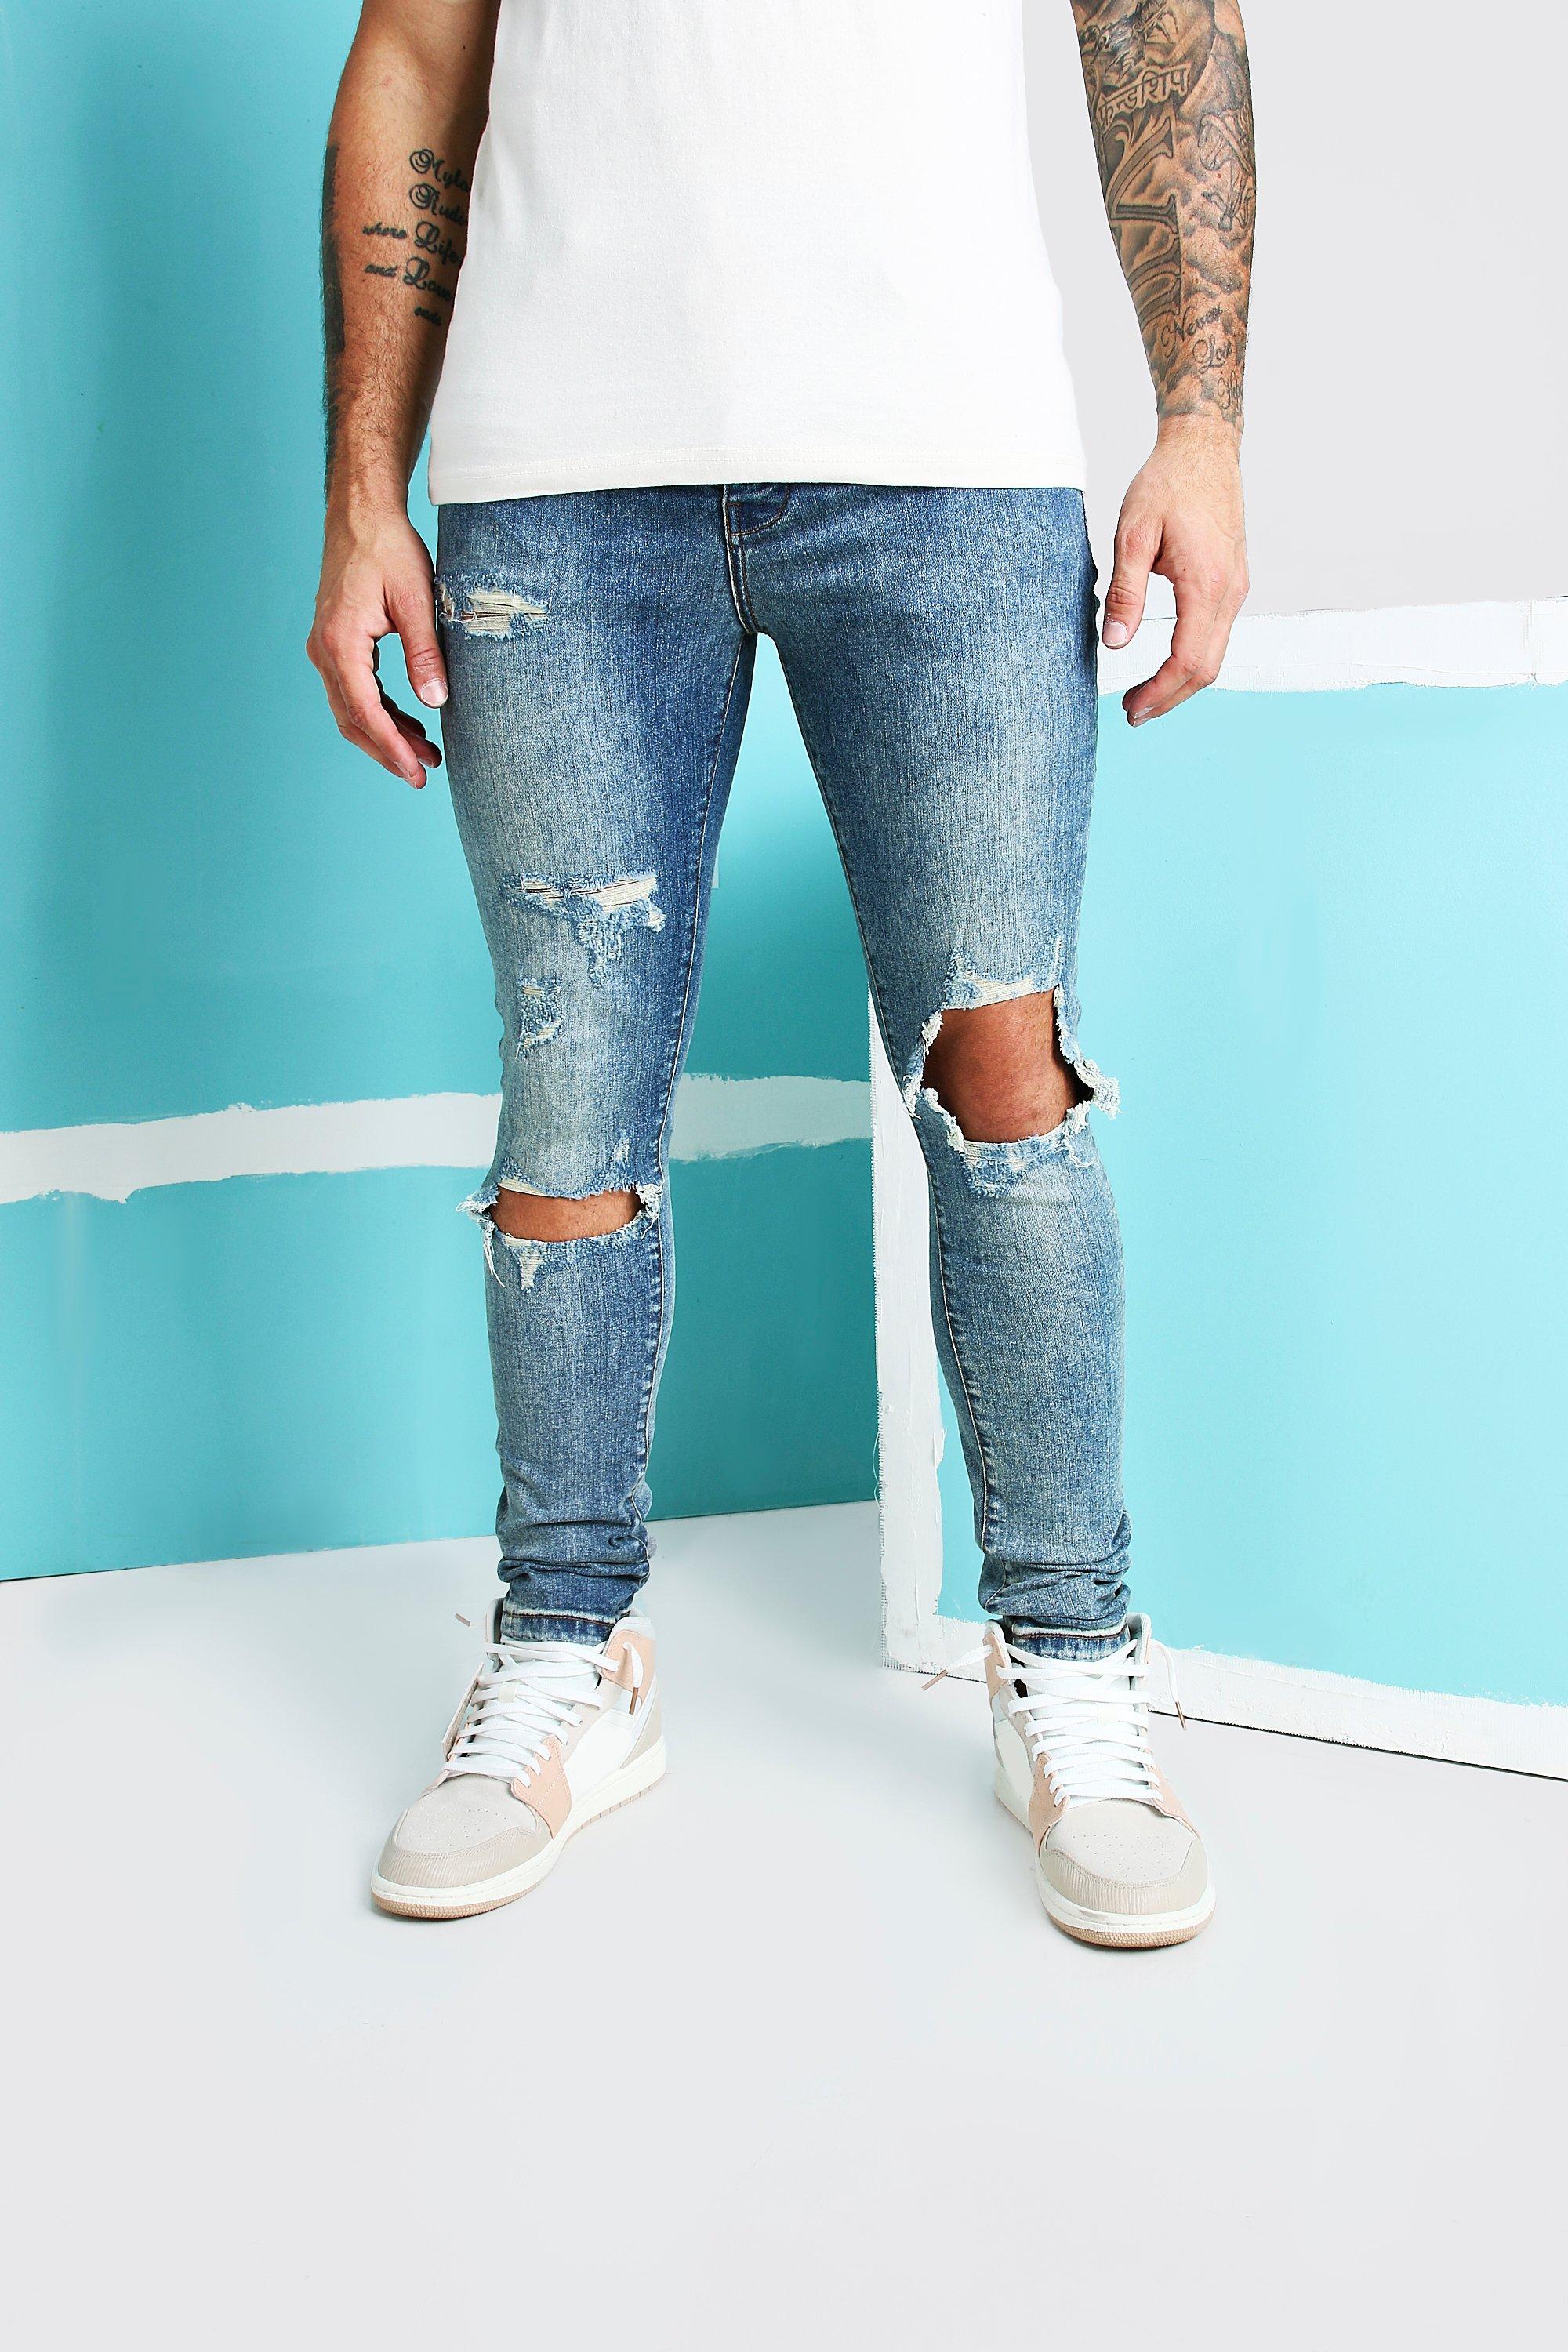 blue ripped knee jeans